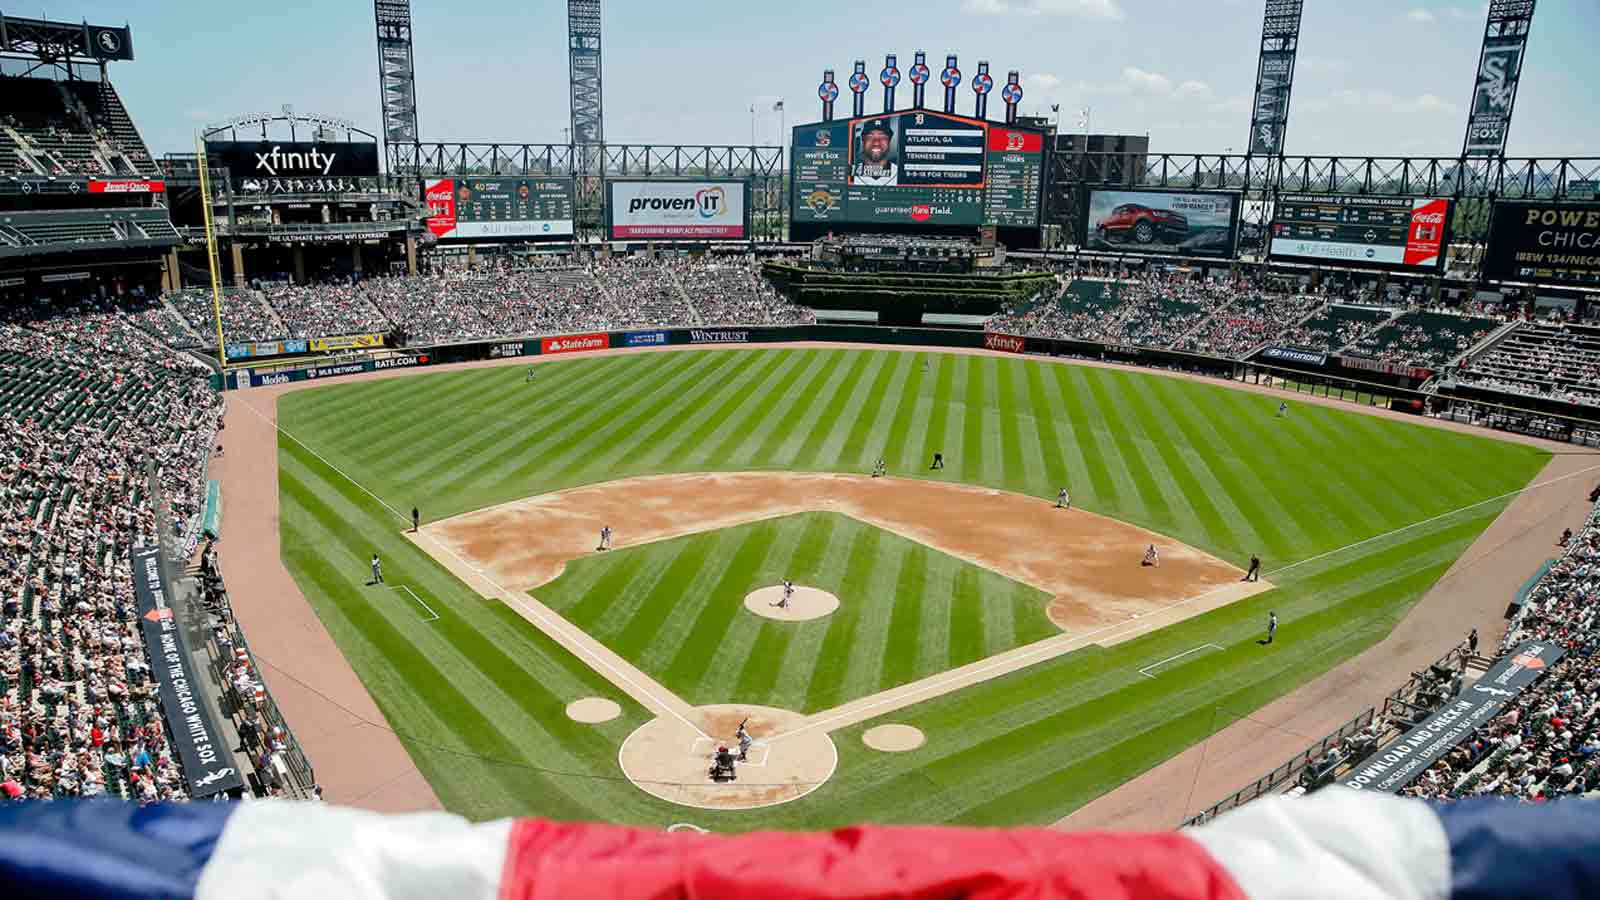 5 Things White Sox Fans Can Look Forward To This Season